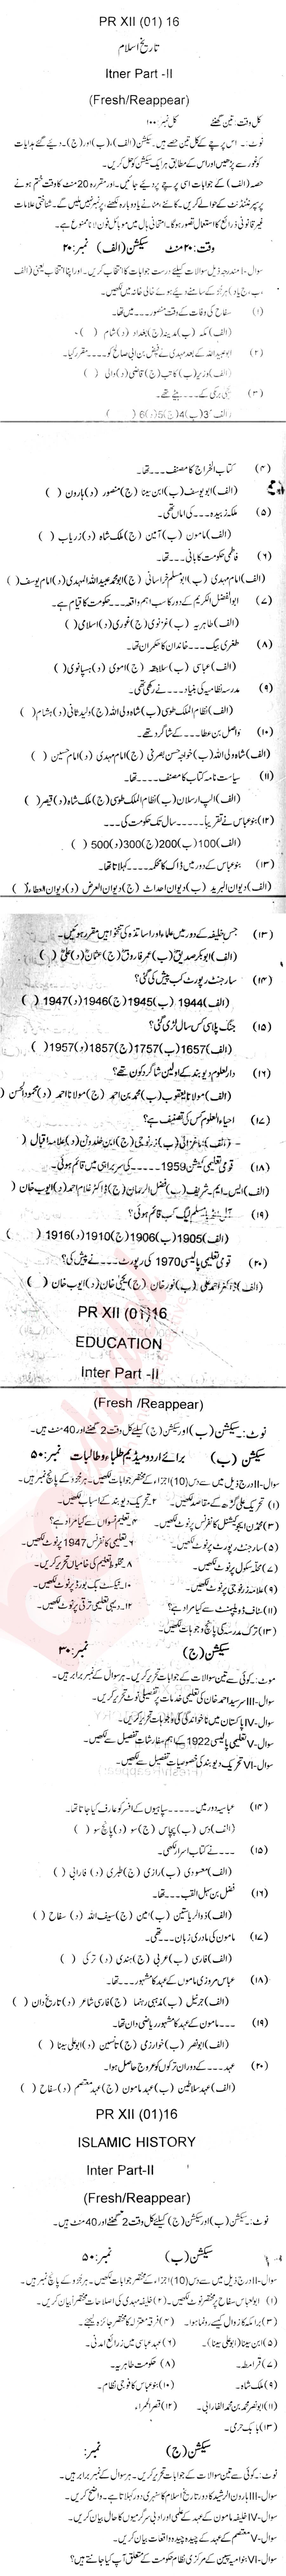 Islamic History FA Part 2 Past Paper Group 1 BISE Abbottabad 2016